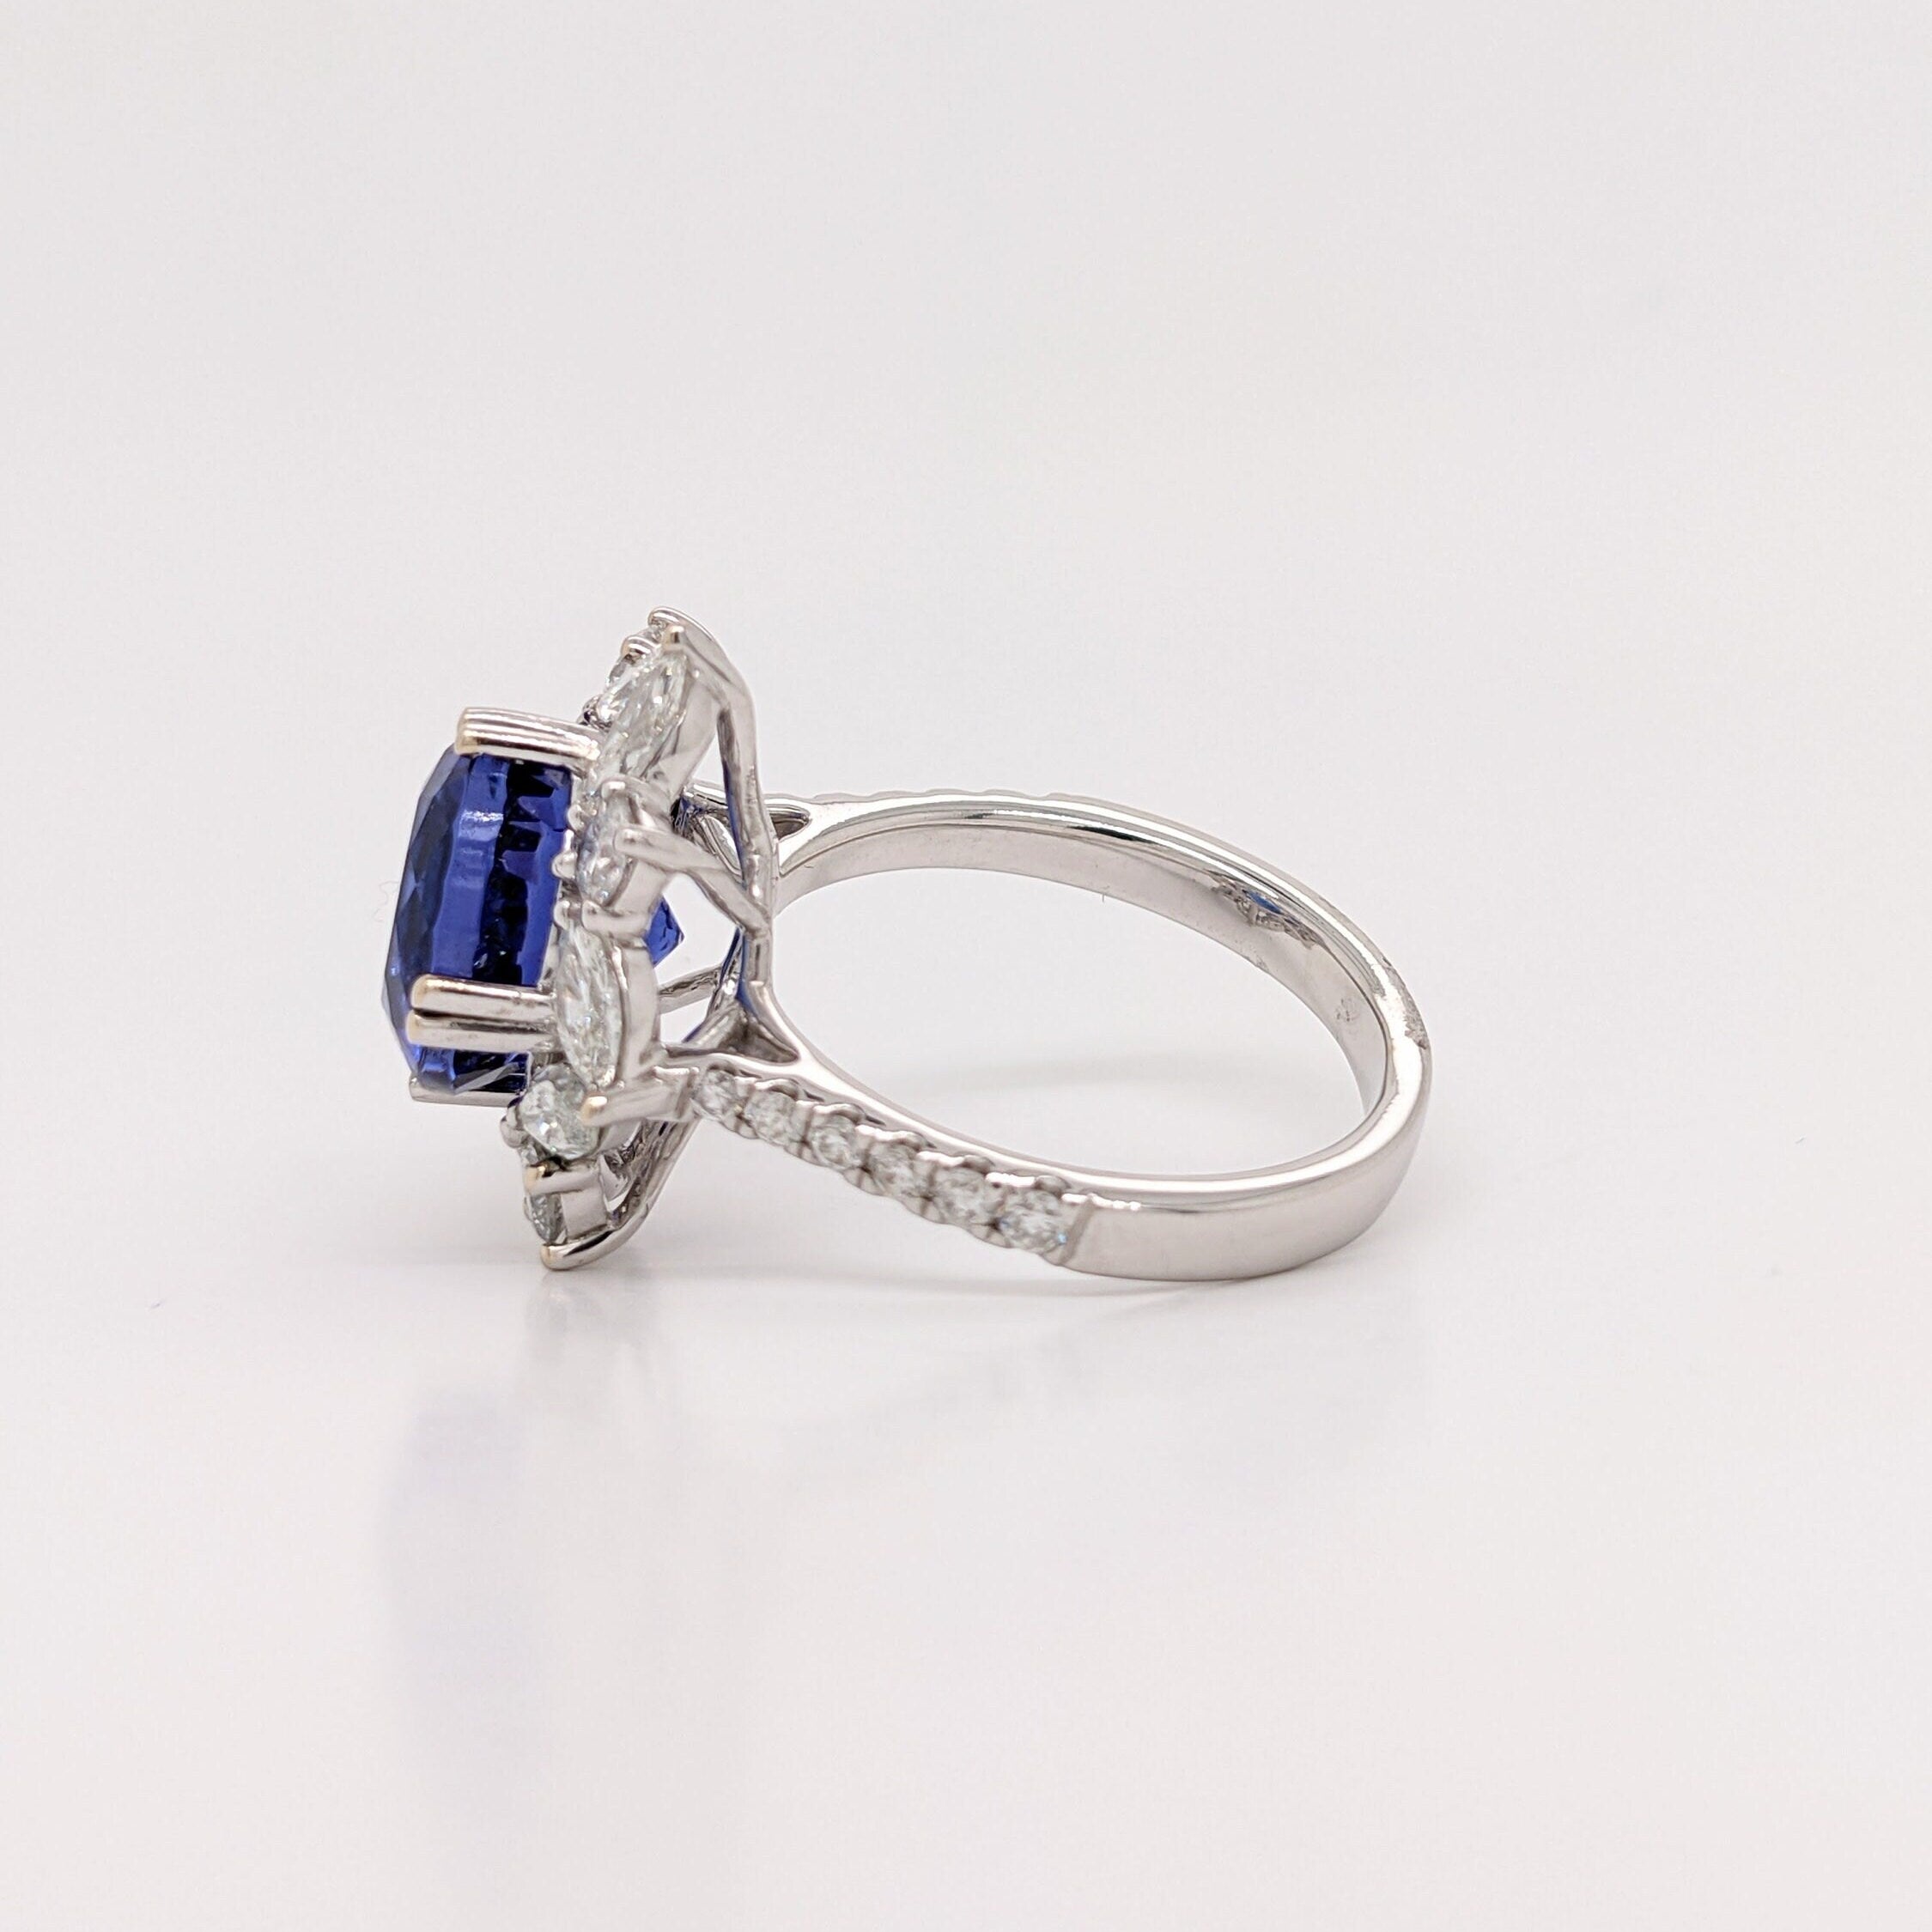 AAAA D block Tanzanite Ring in 14K White Gold and Diamond setting | 5 carat + | Purple and Red Flashes | December Birthstone Ring | For me